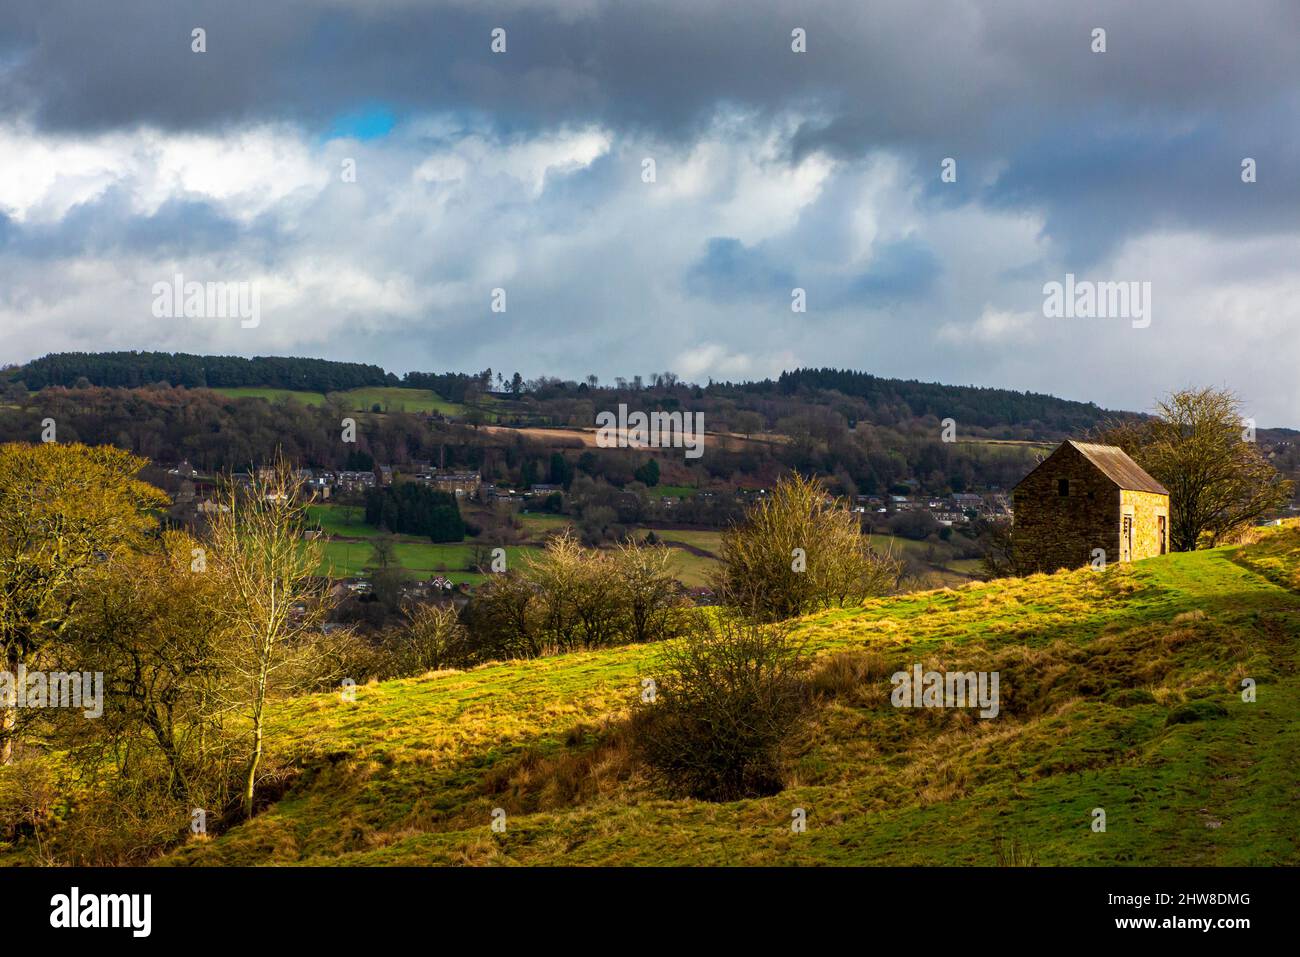 Field barn in typical Peak District landscape at Oaker near Matlock in the Derbyshire Dales England UK Stock Photo